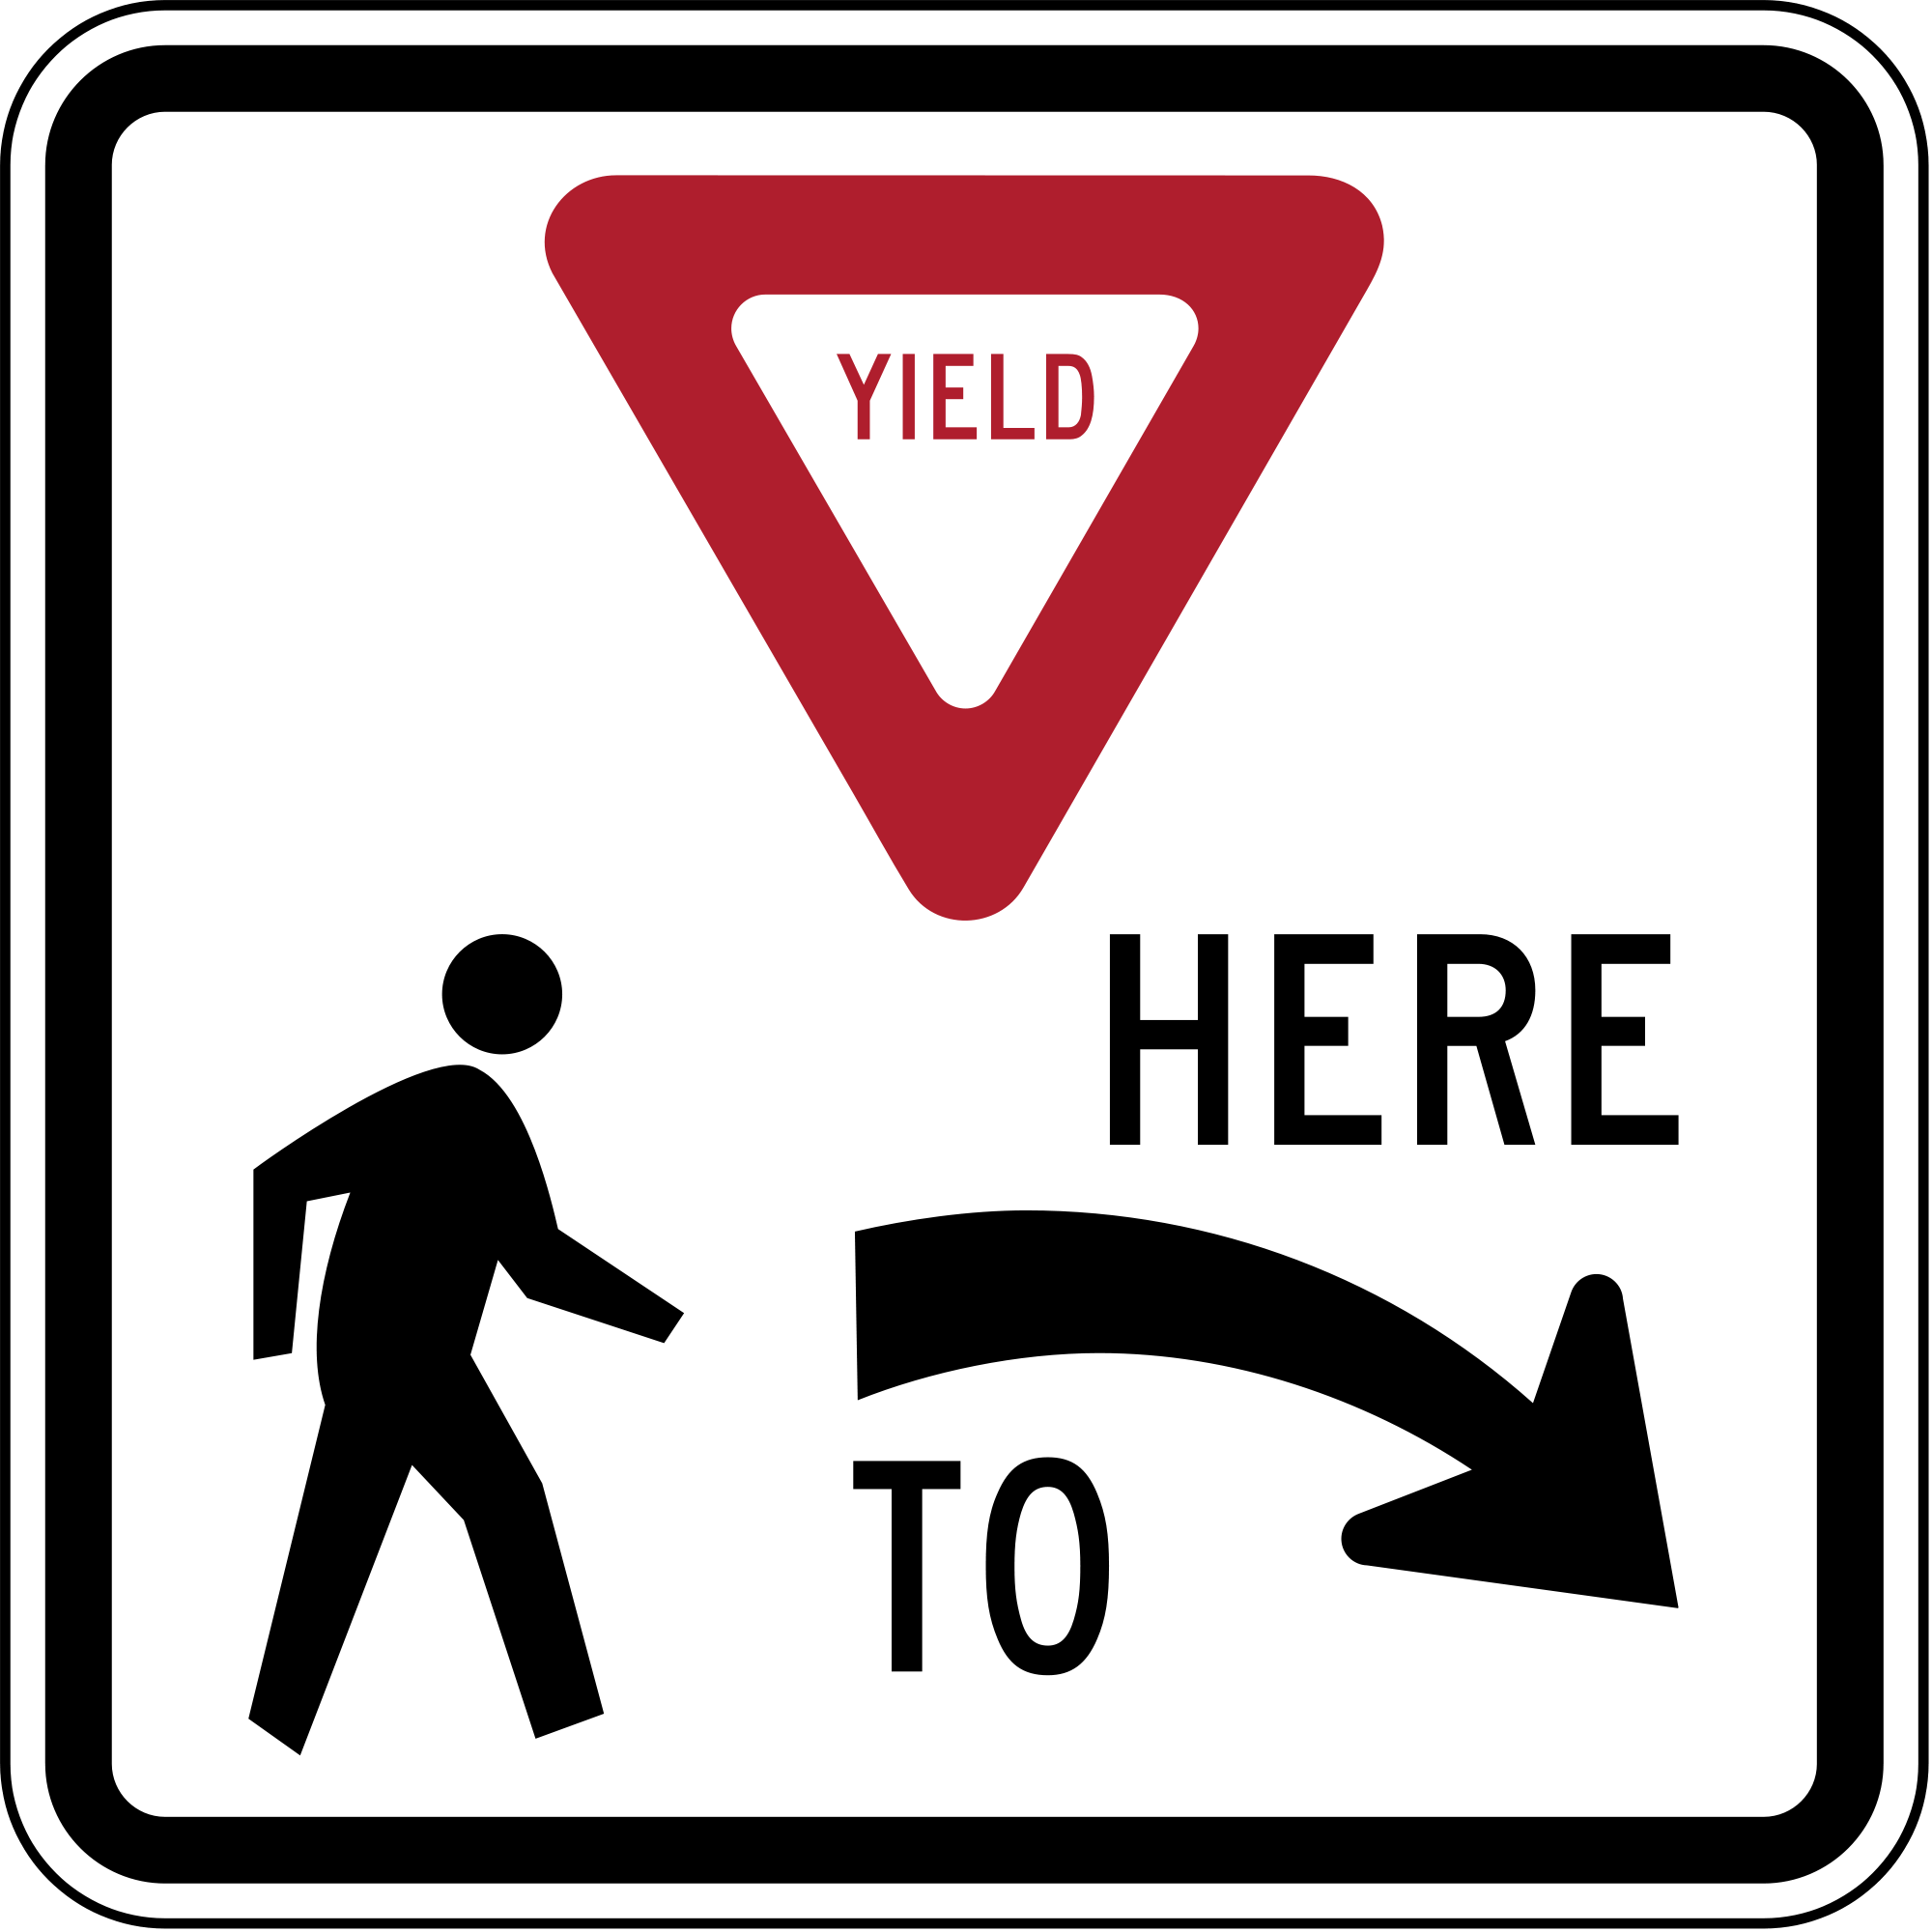 R1-5R Yield Here To Pedestrians Regulatory Sign